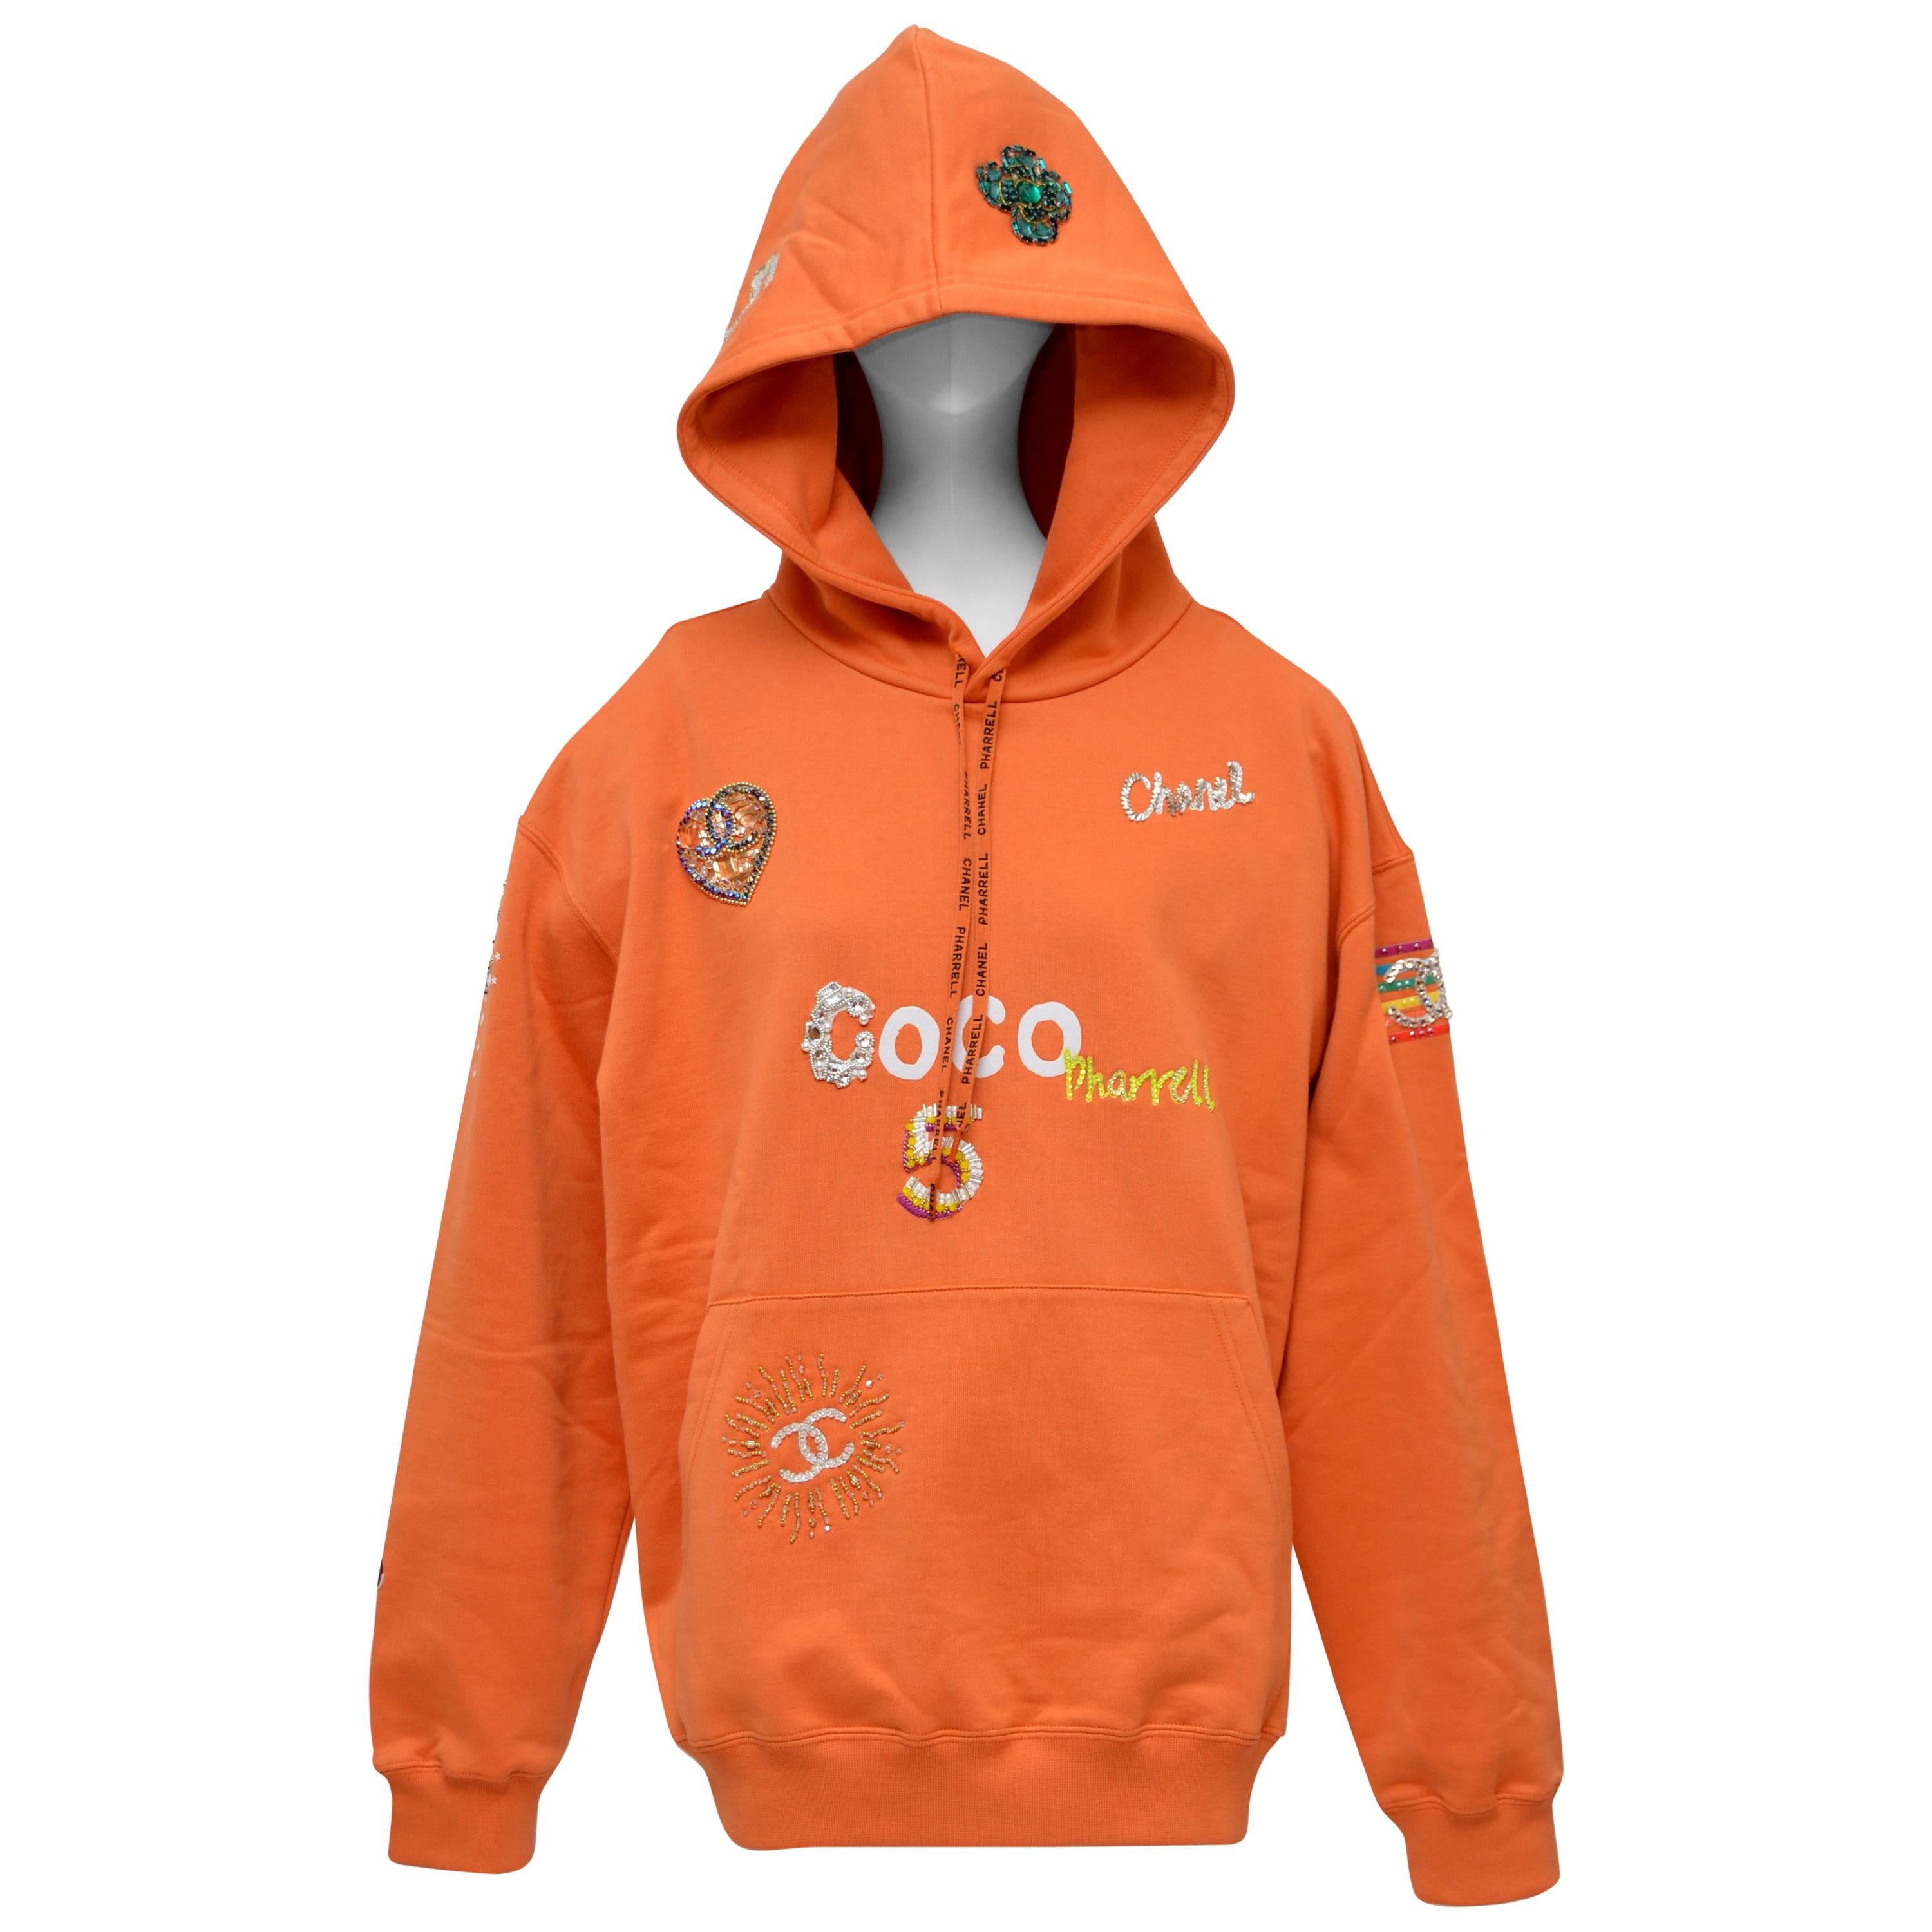 Chanel x Pharrell Capsule Collection Hoodie Lesage Embroidery Orange M NEW at 1stDibs | pharrell hoodie, chanel hoodie, pharrell sweatshirt